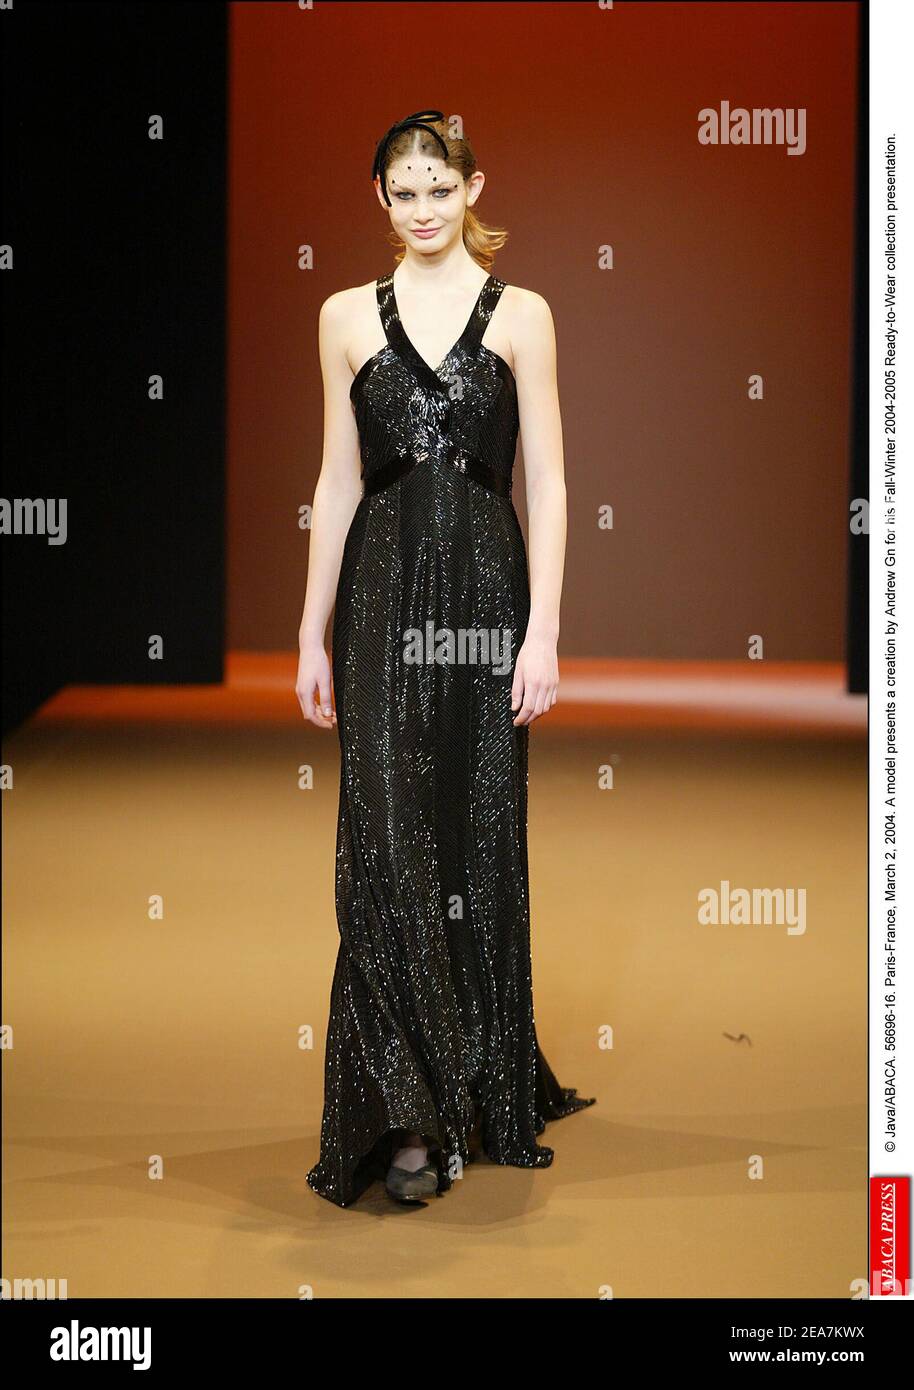 © Java/ABACA. 56696-16. Paris-France, March 2, 2004. A model presents a creation by Andrew Gn for his Fall-Winter 2004-2005 Ready-to-Wear collection presentation. Stock Photo